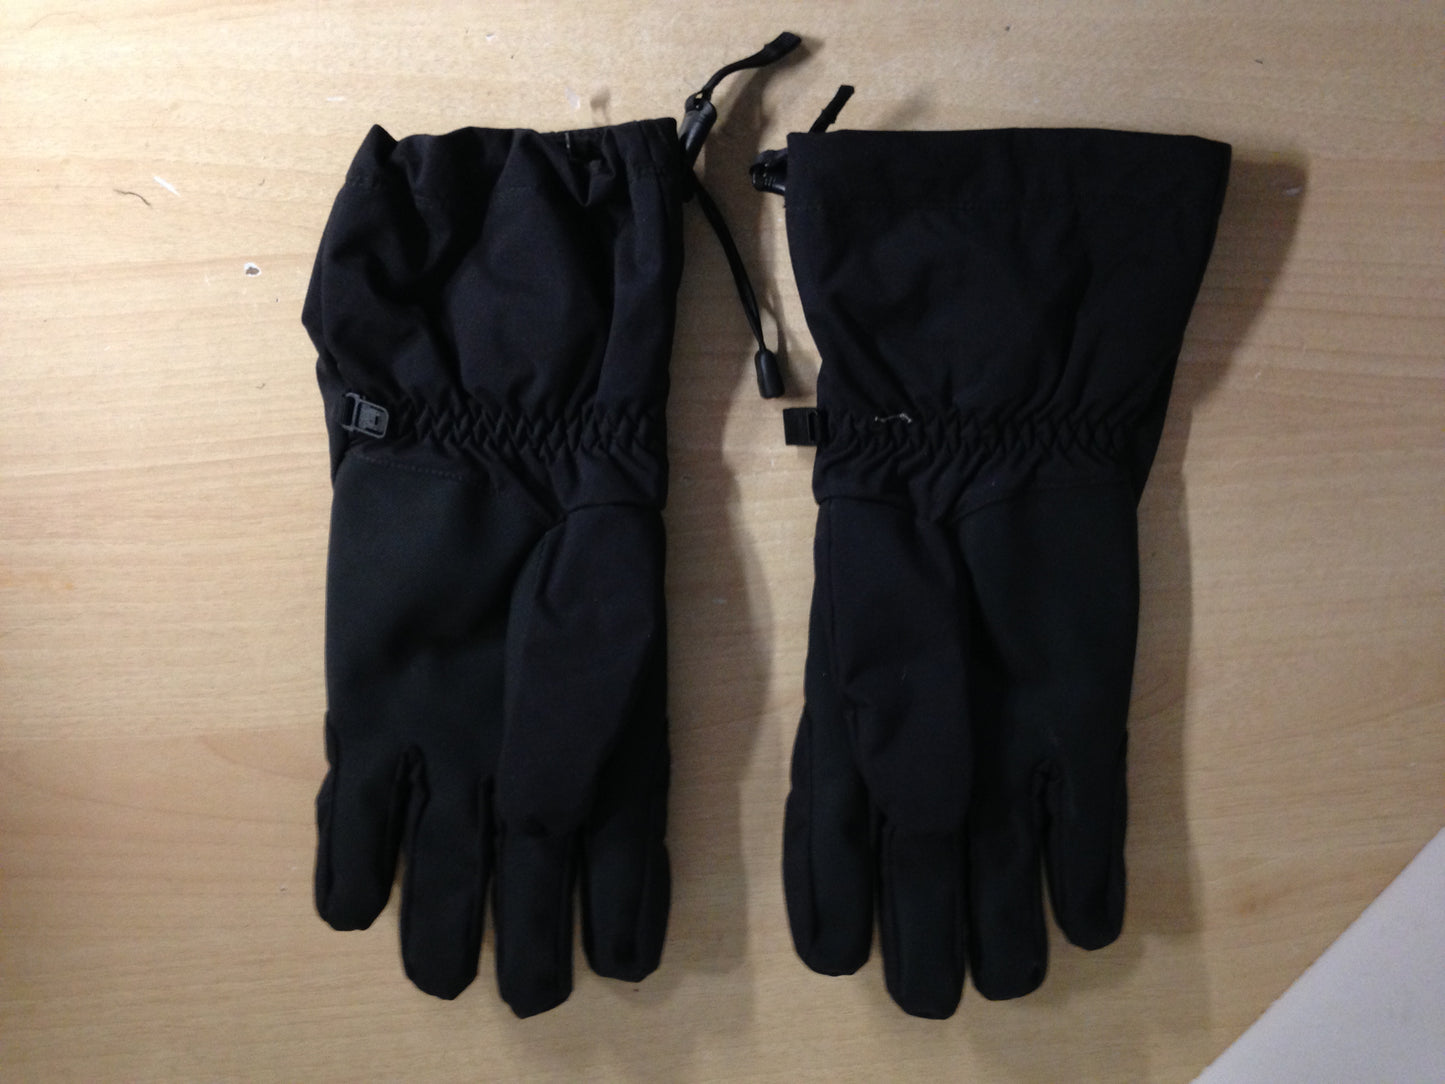 Winter Gloves and Mitts Men's Size Large MEC Black New Demo Model Snowboarding